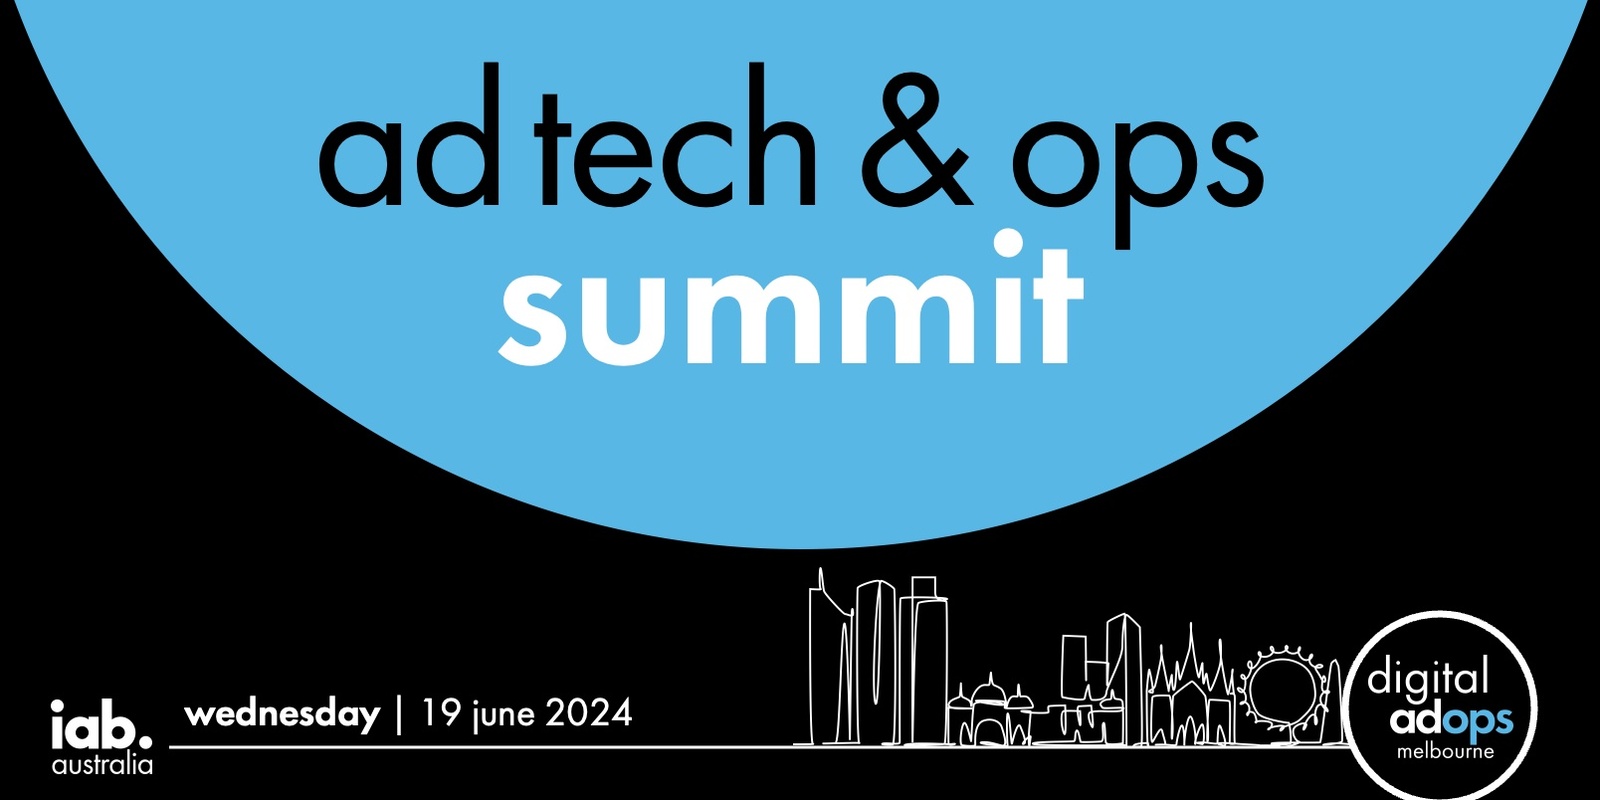 Banner image for Ad Tech & Ops Summit Melbourne 